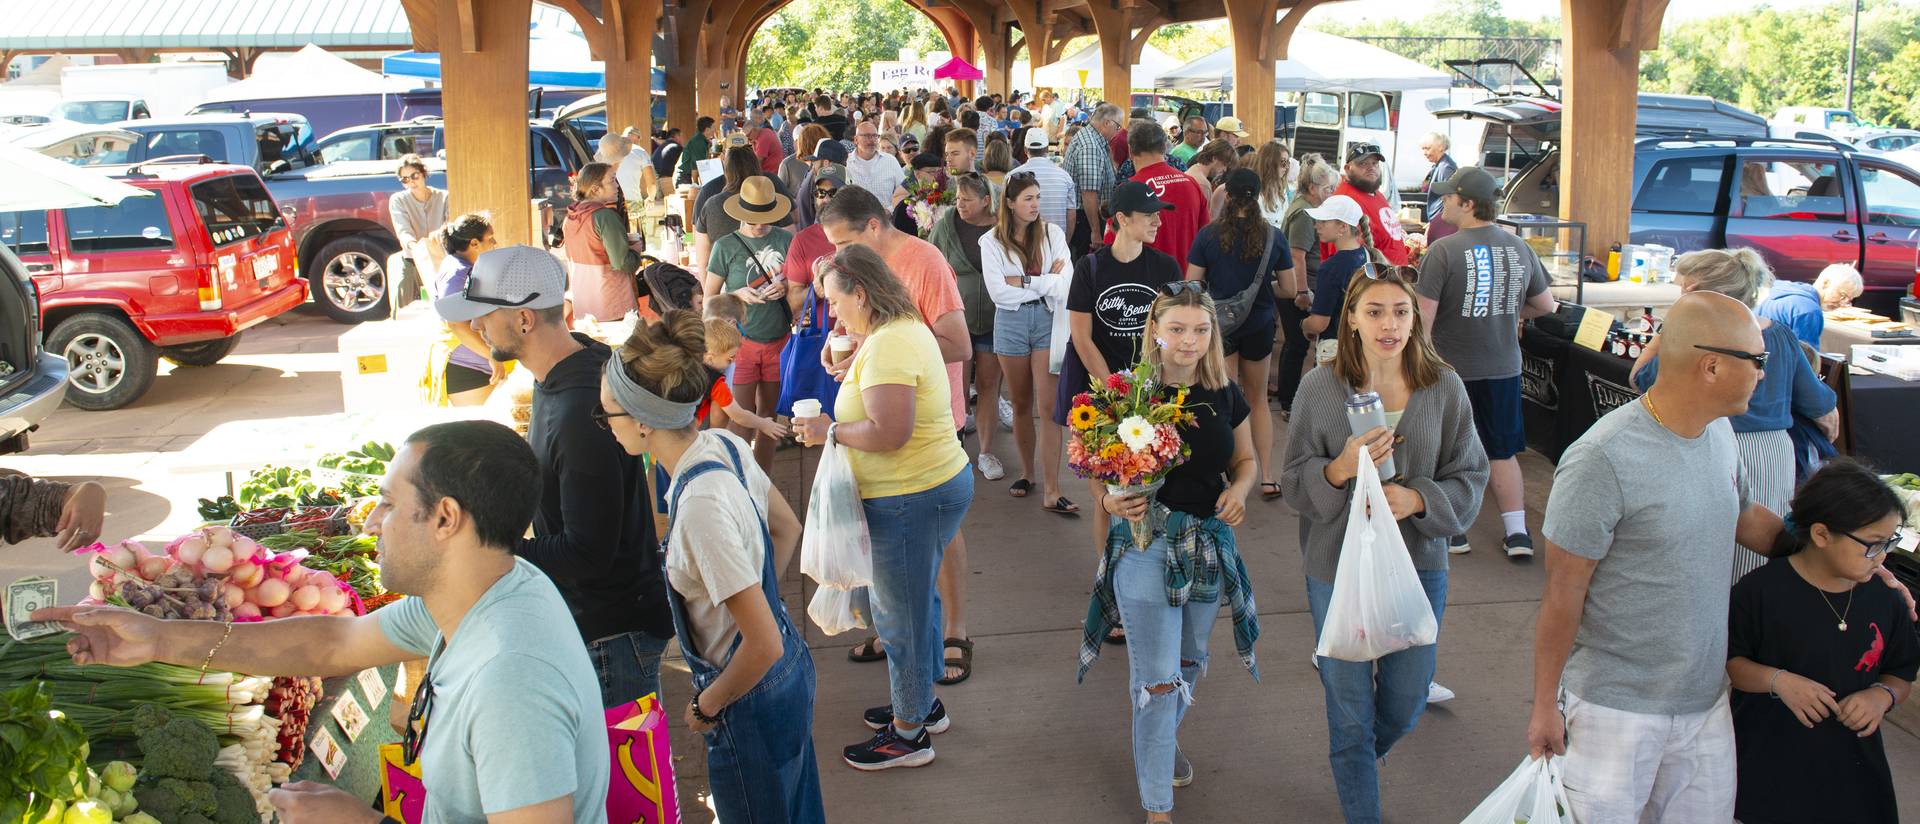 A UW-Eau Claire research team is working with the Eau Claire Downtown Farmers Market on a program that helps community members who are food insecure. (Photo by Shane Opatz)